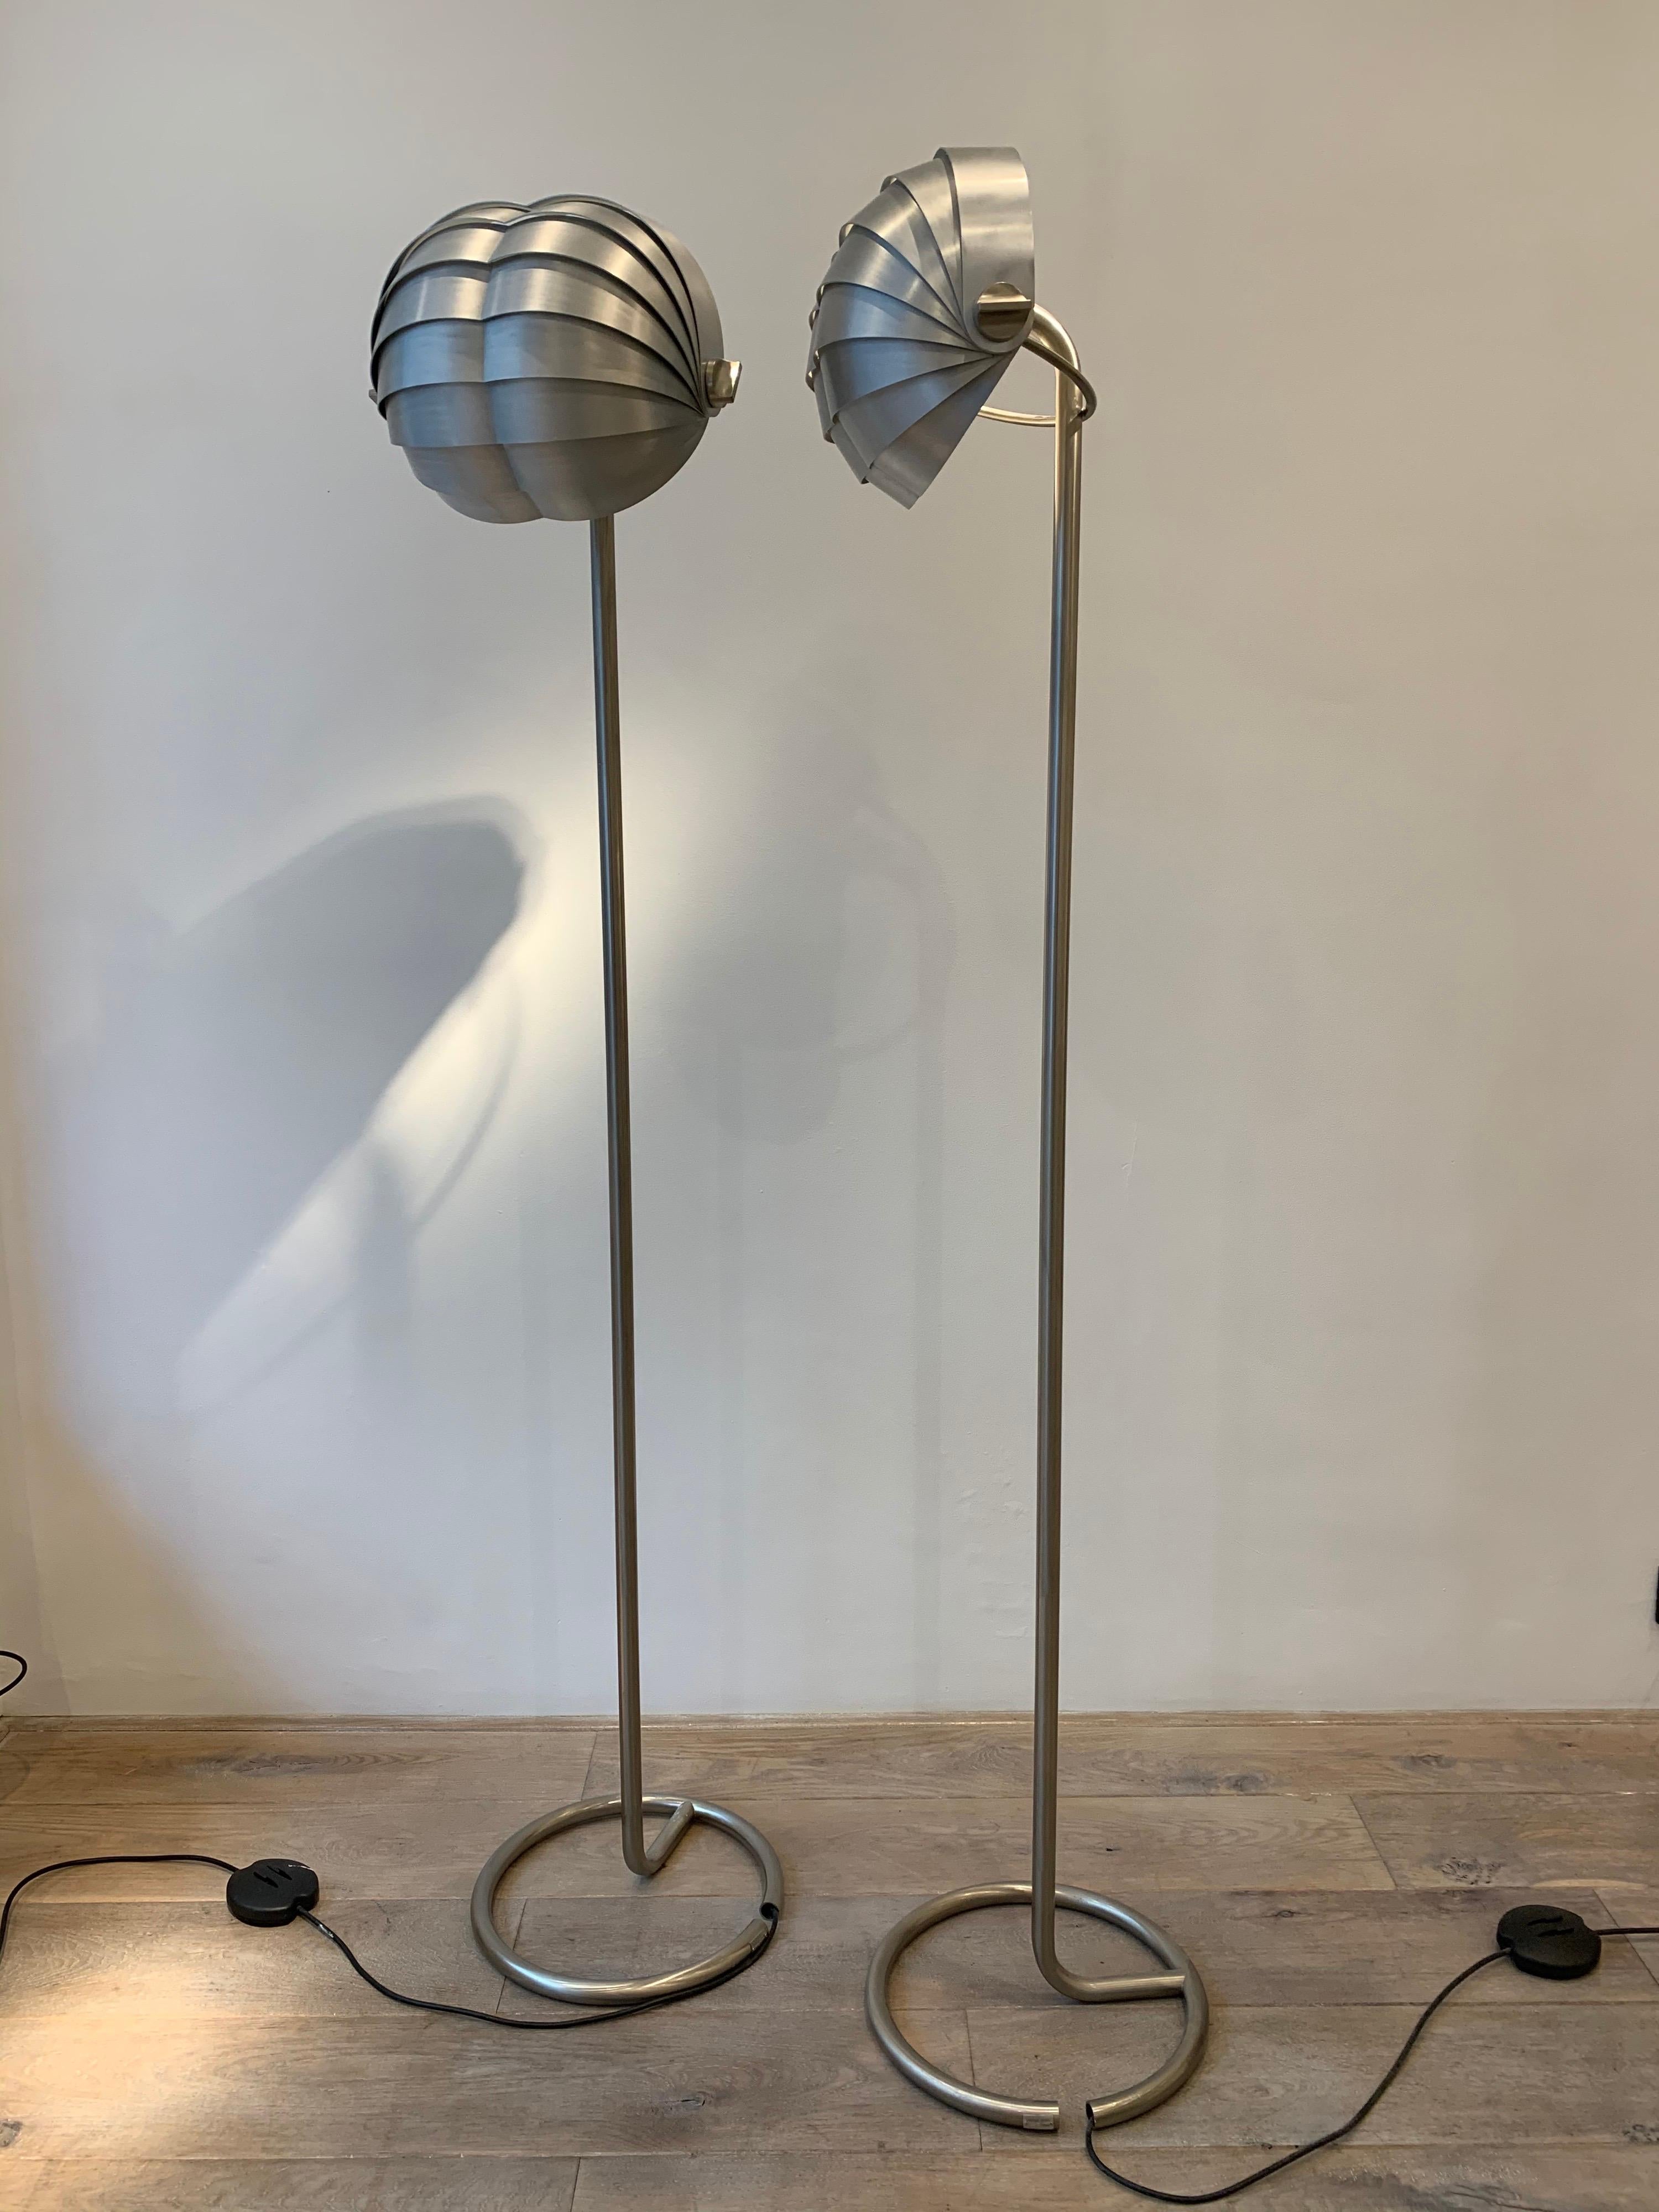 Bottega Gadda was a reputable studio specialising in metalsmith work in Milano. They realised and designed a diversity of lamp. This model is thought to be inspired by a design by Giotto Stoppino in the 1970s but was never edited. It was finally